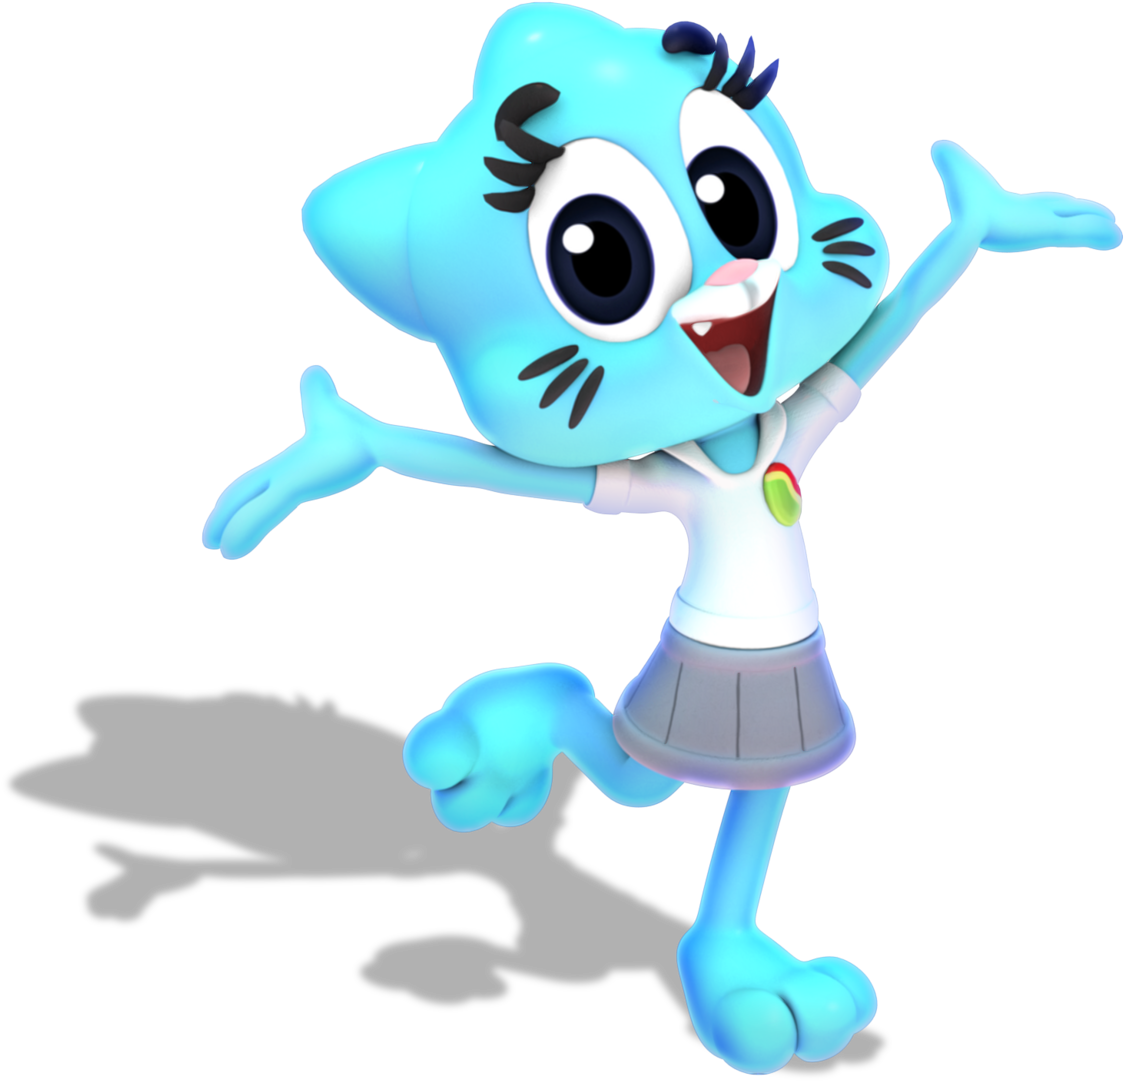 The Amazing World of Gumball Cartoon PNG Image Background